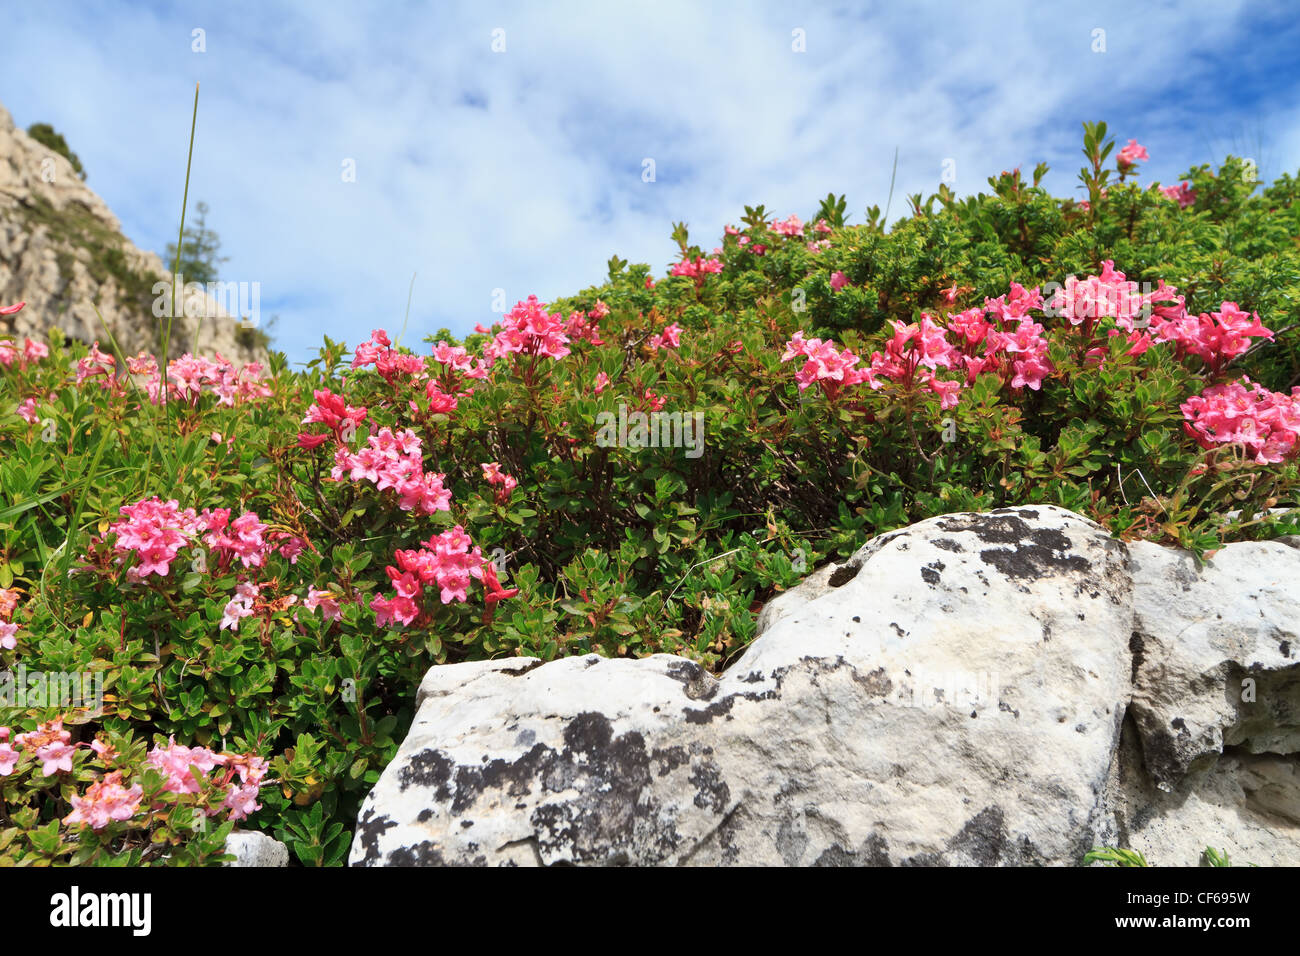 alpine landscape on summer with rhododendron plants between rocks Stock Photo